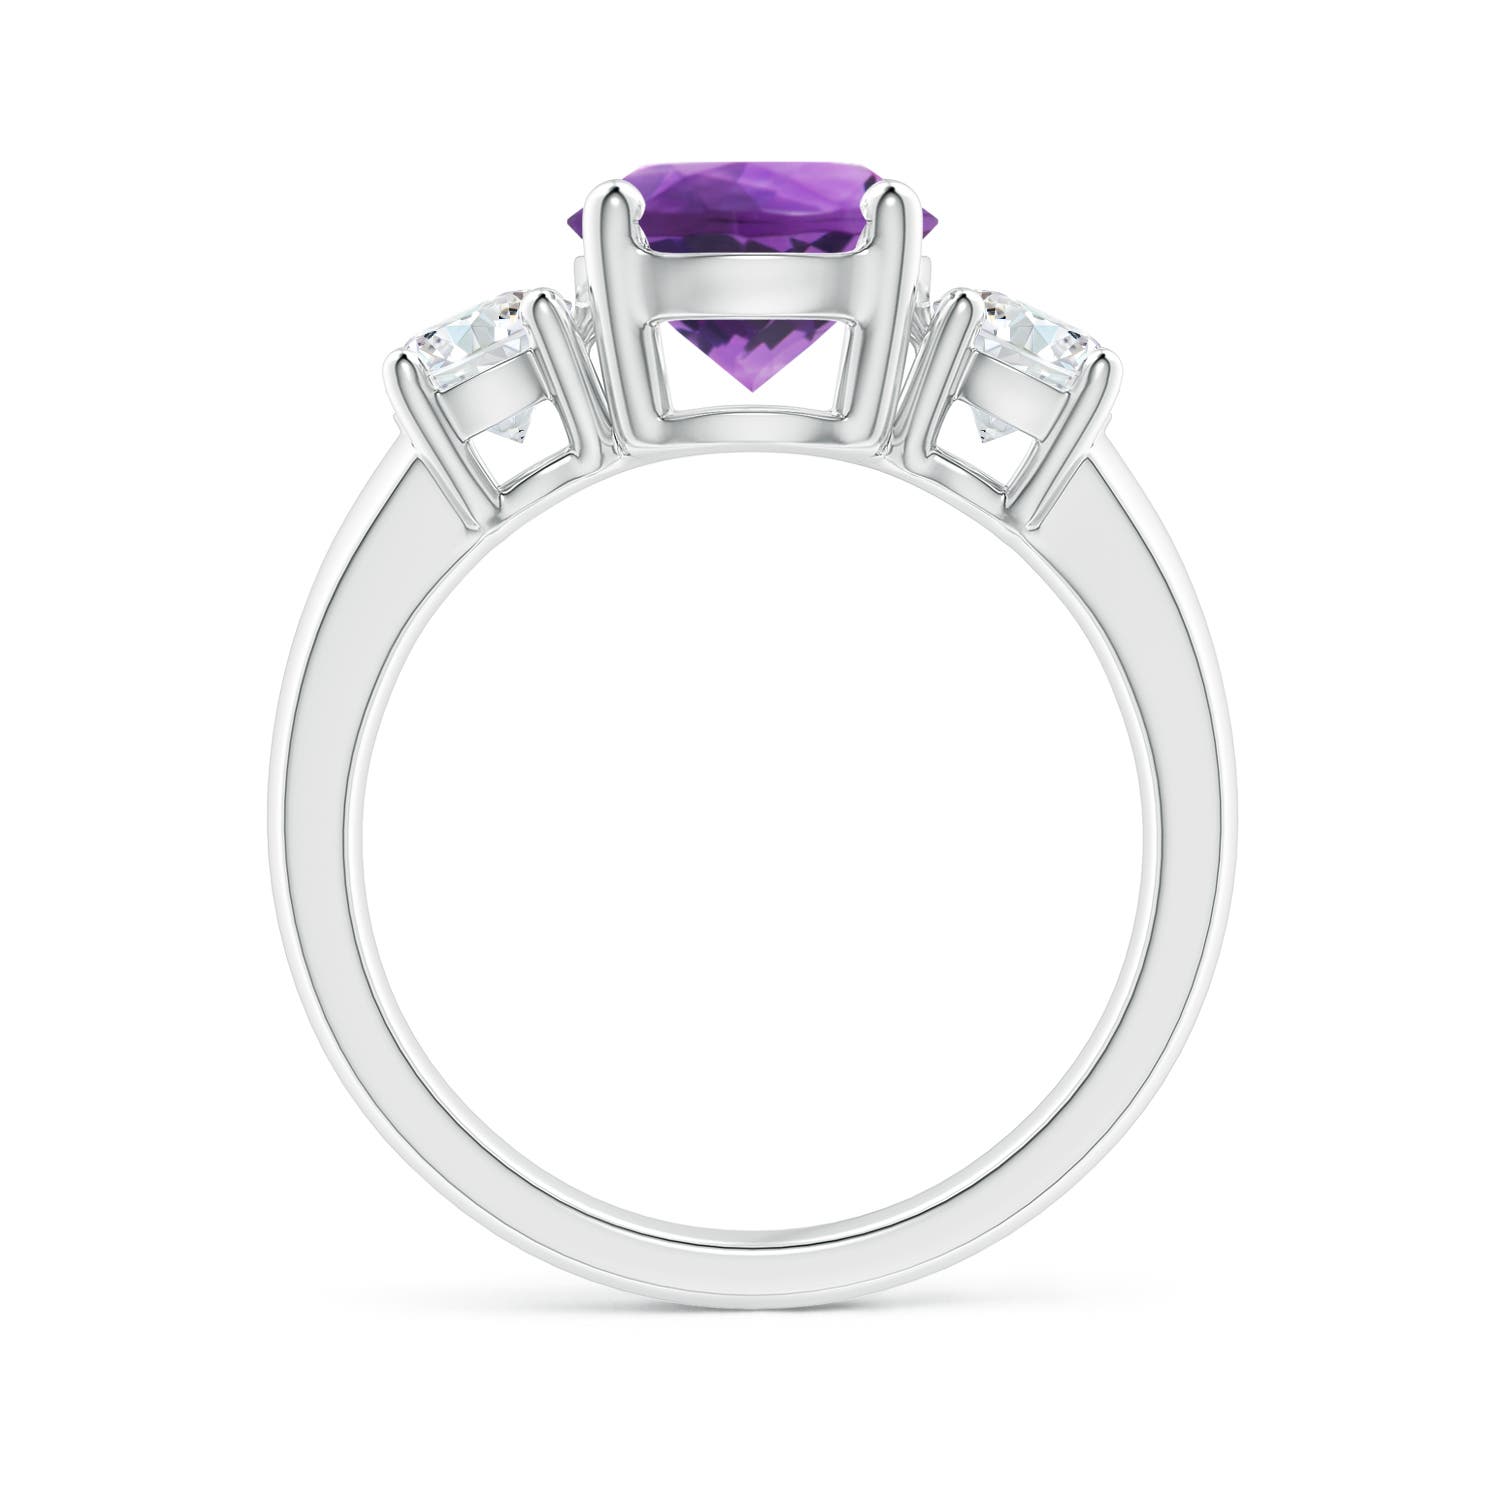 AAA - Amethyst / 2.4 CT / 14 KT White Gold